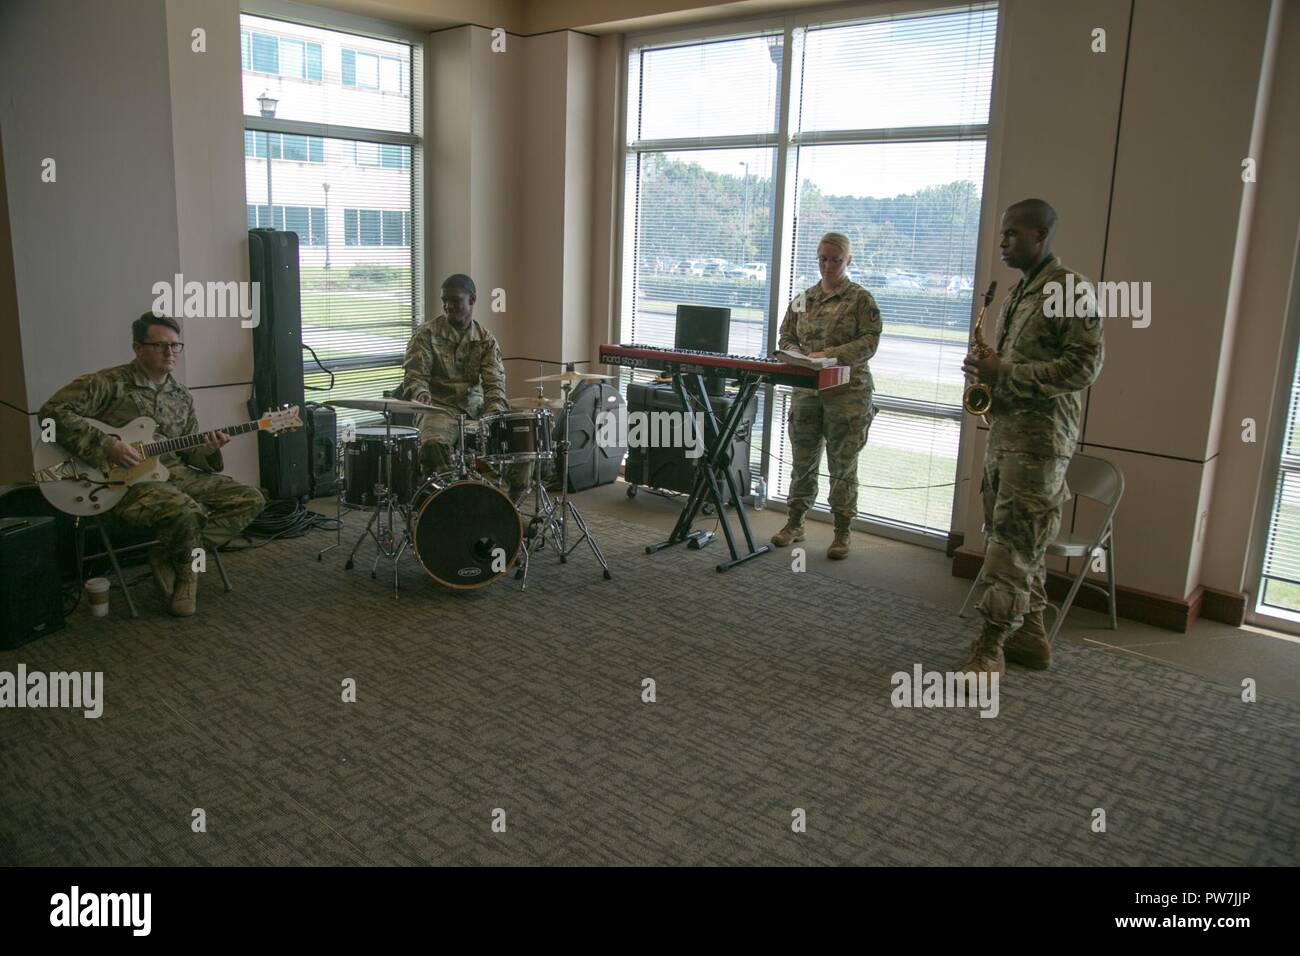 Members of the Army Materiel Command's Band perform during the Hispanic-American Heritage Month Observance Sept. 25, 2017 at Redstone Arsenal, Alabama. The guest speaker for the event was Christine Chavez, granddaughter of labor leader and civil rights activist Cesar Chavez. Stock Photo